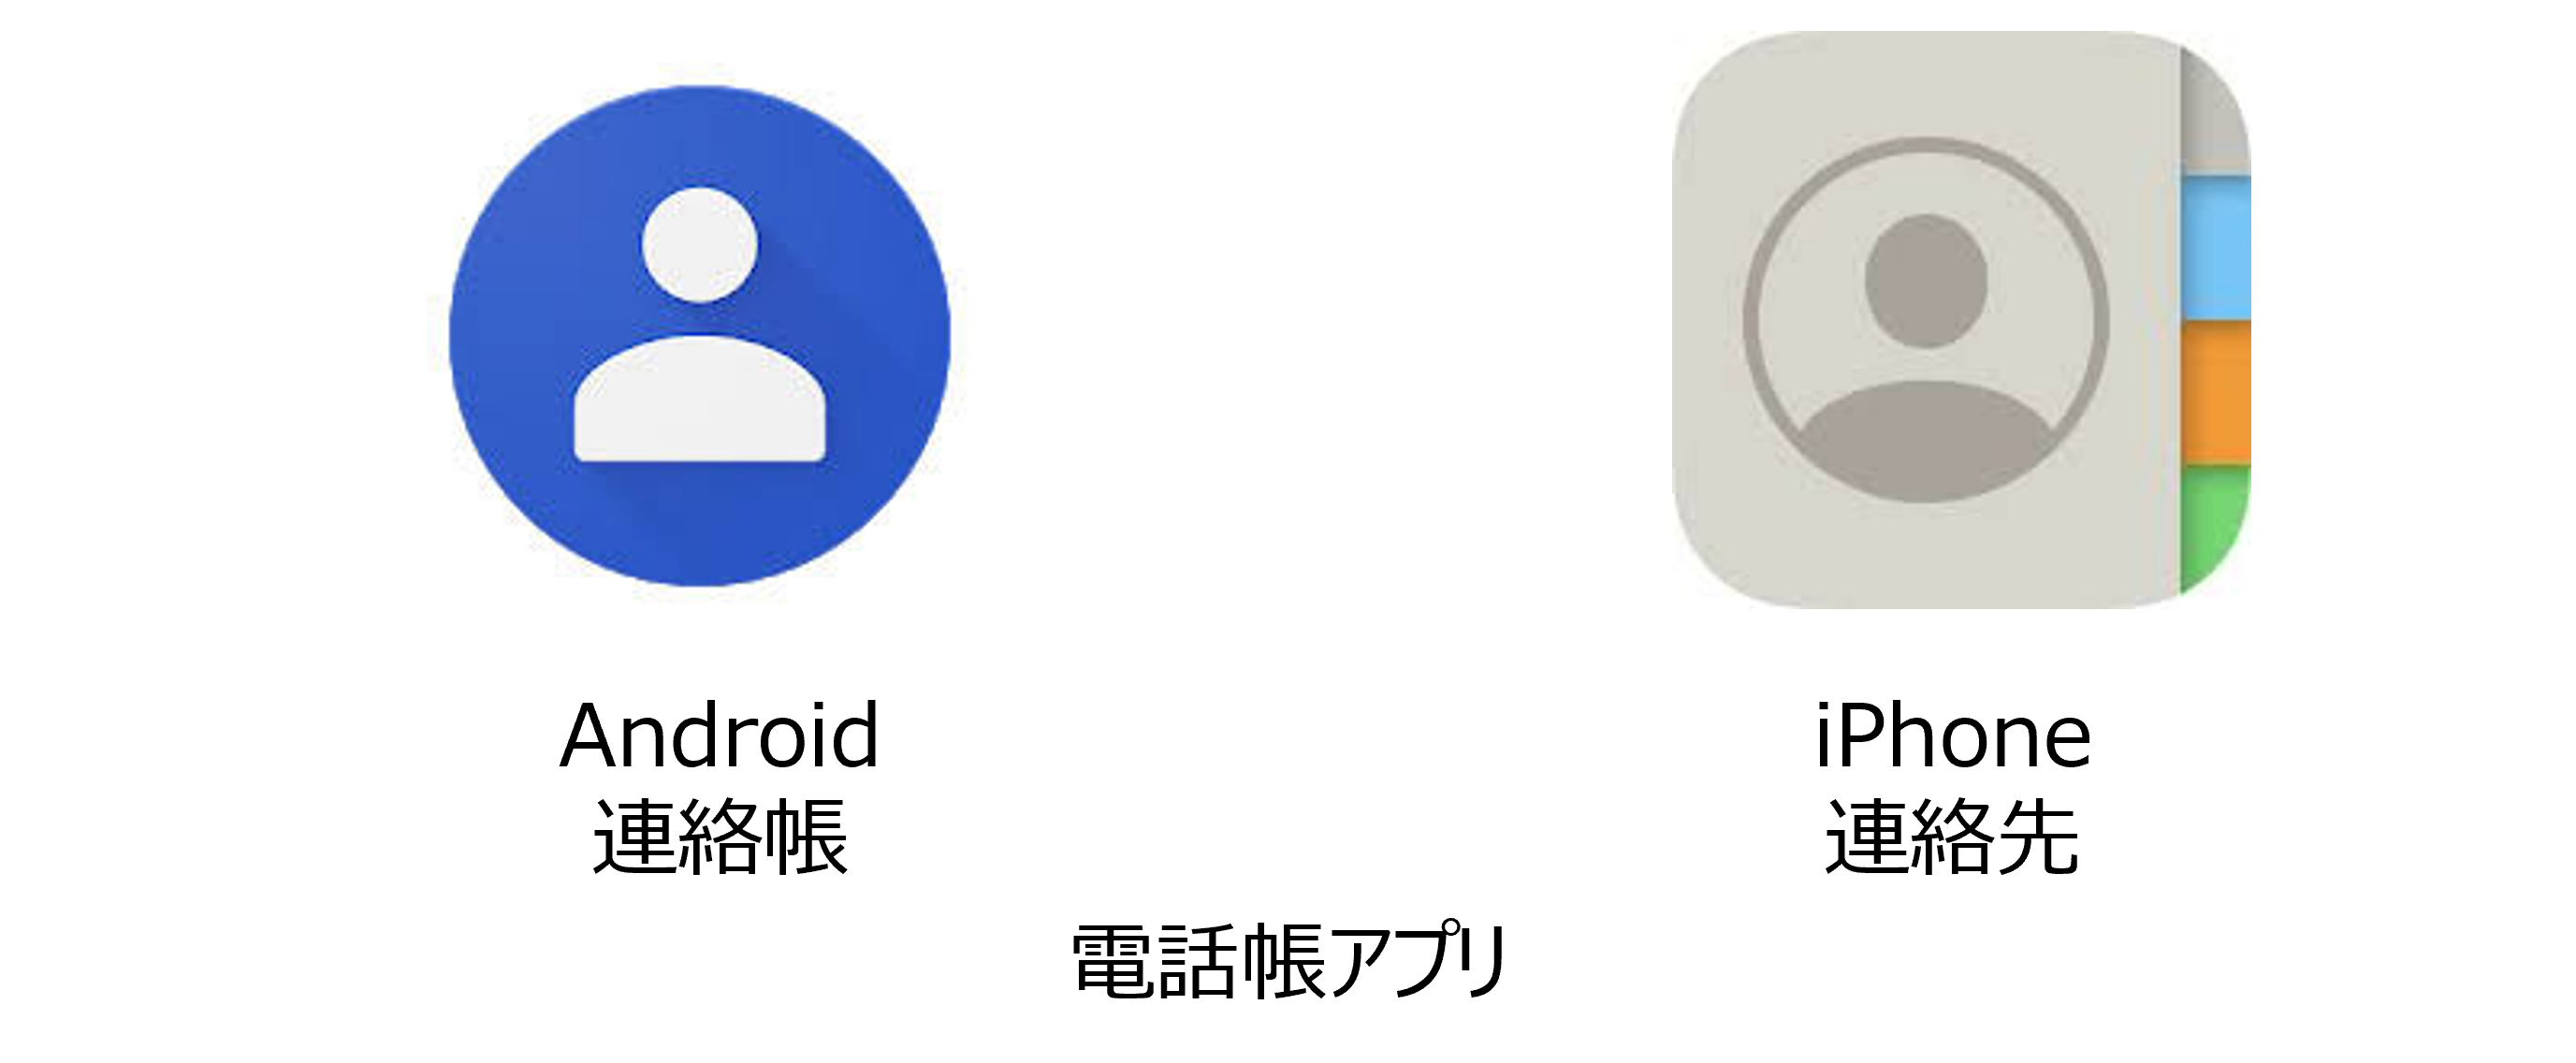 Android、iOSの電話帳アイコン画面